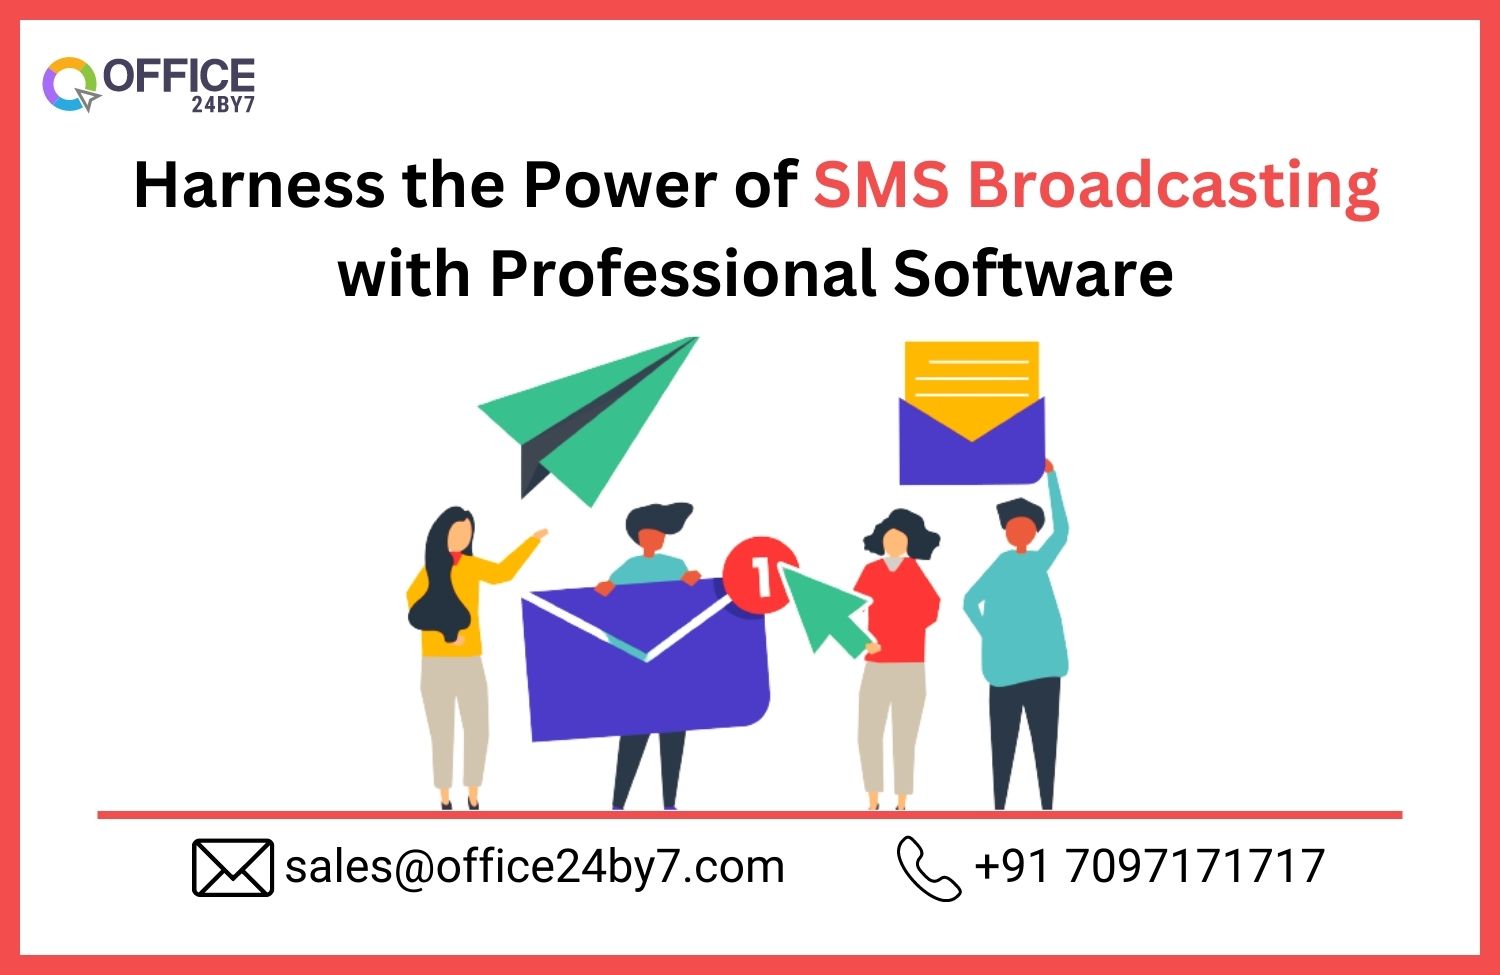 Harness the Power of SMS Broadcasting with Professional Software